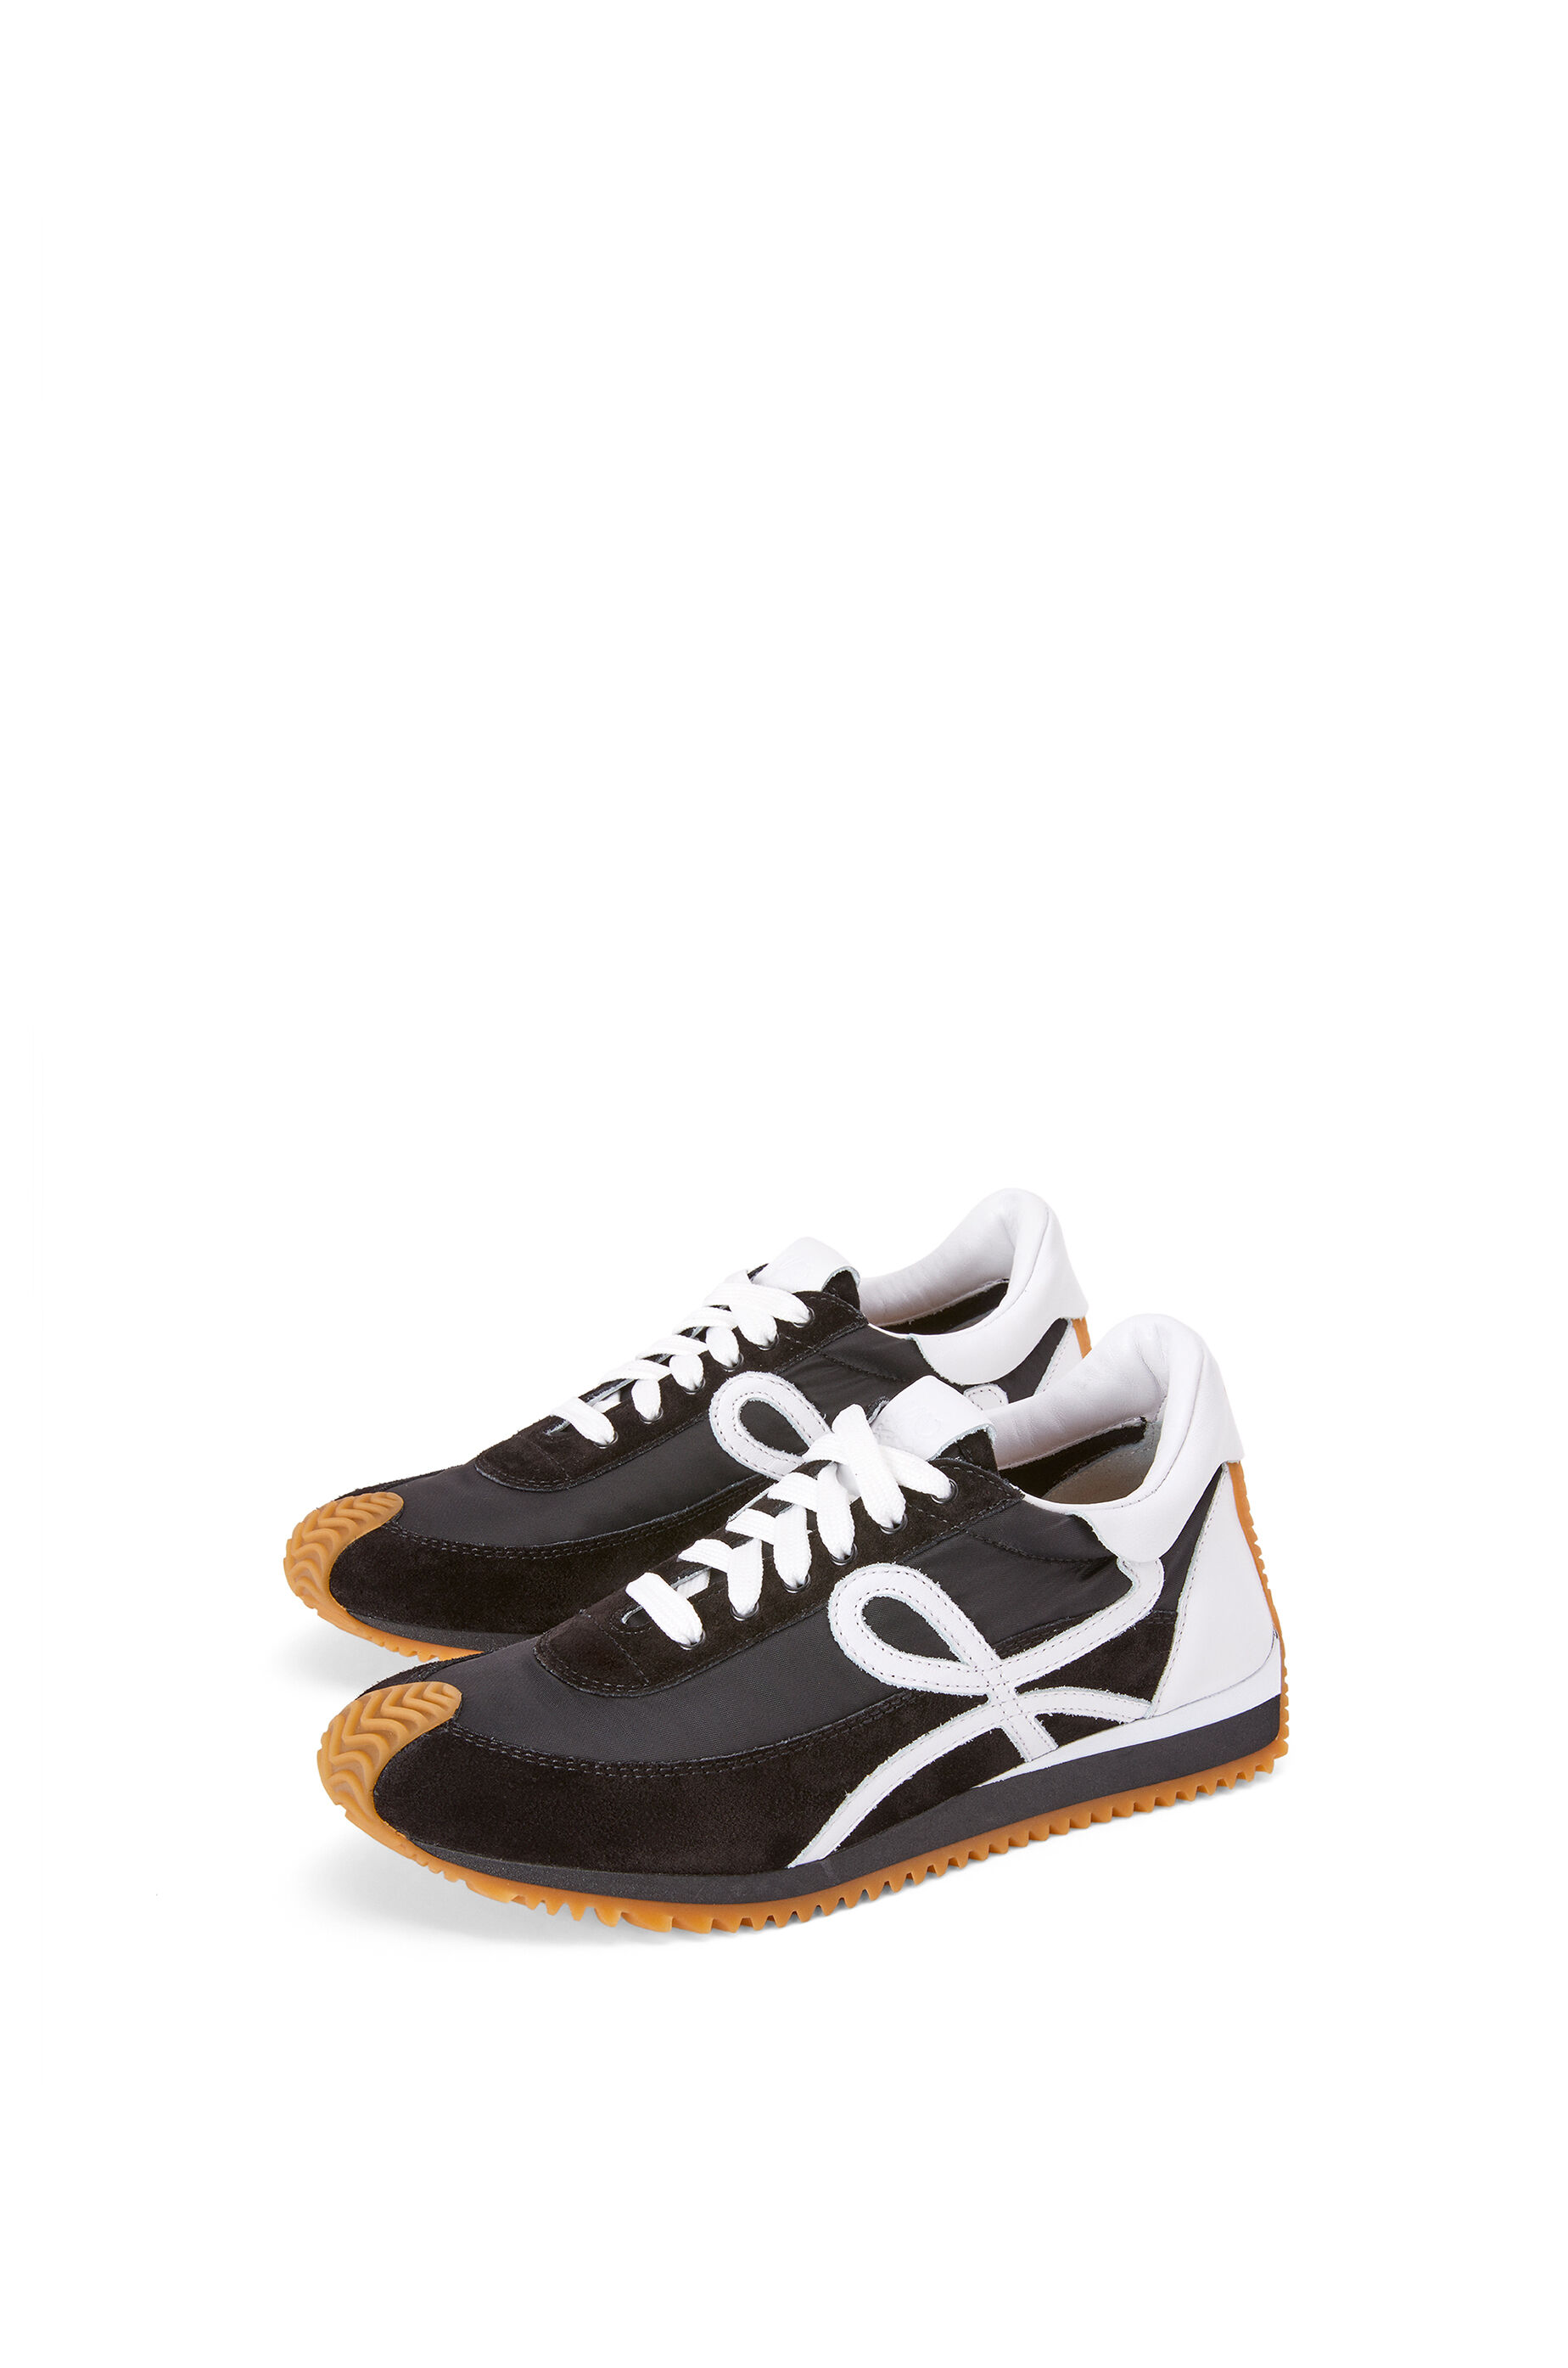 Flow runner in nylon and suede